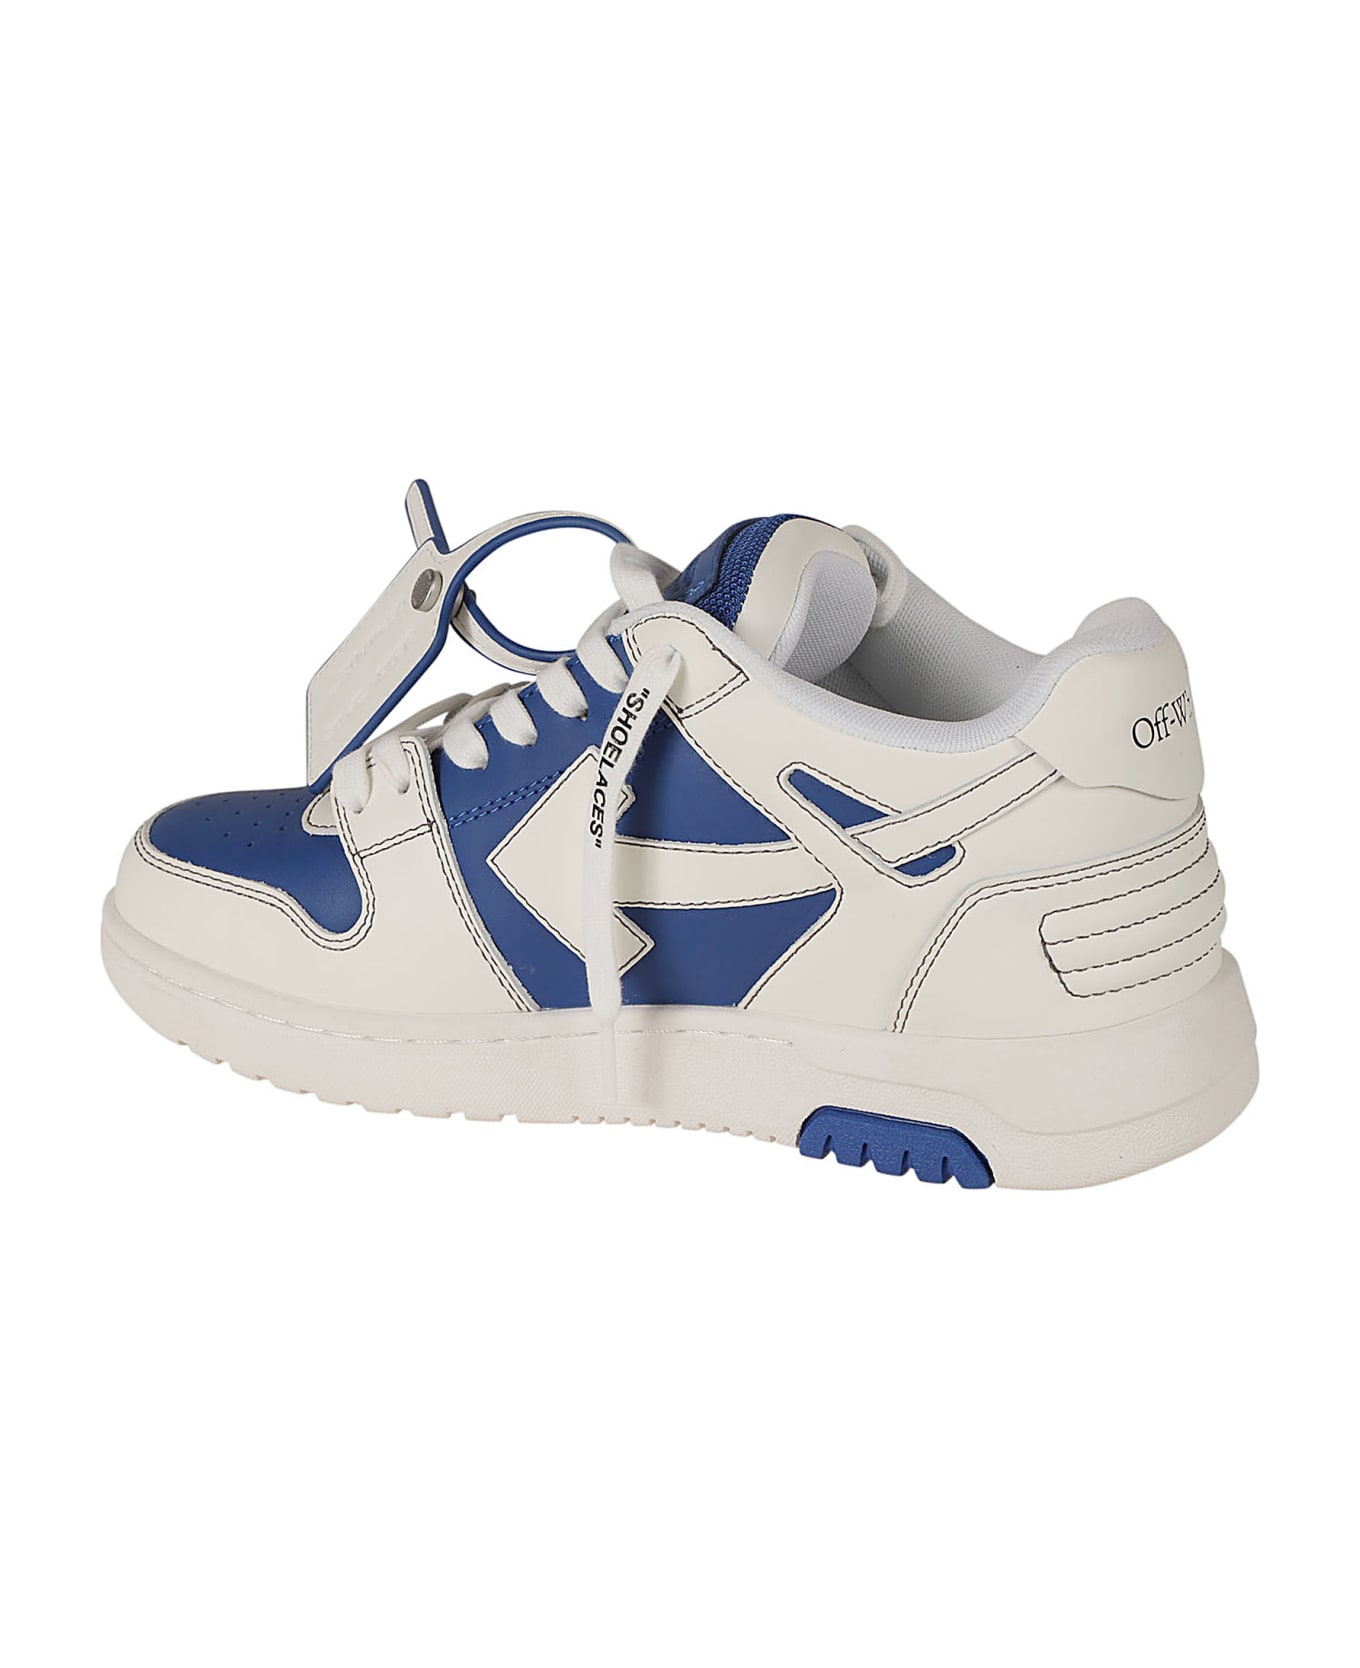 Off-White Out Of Office Sneakers - Navy Blue/Off White